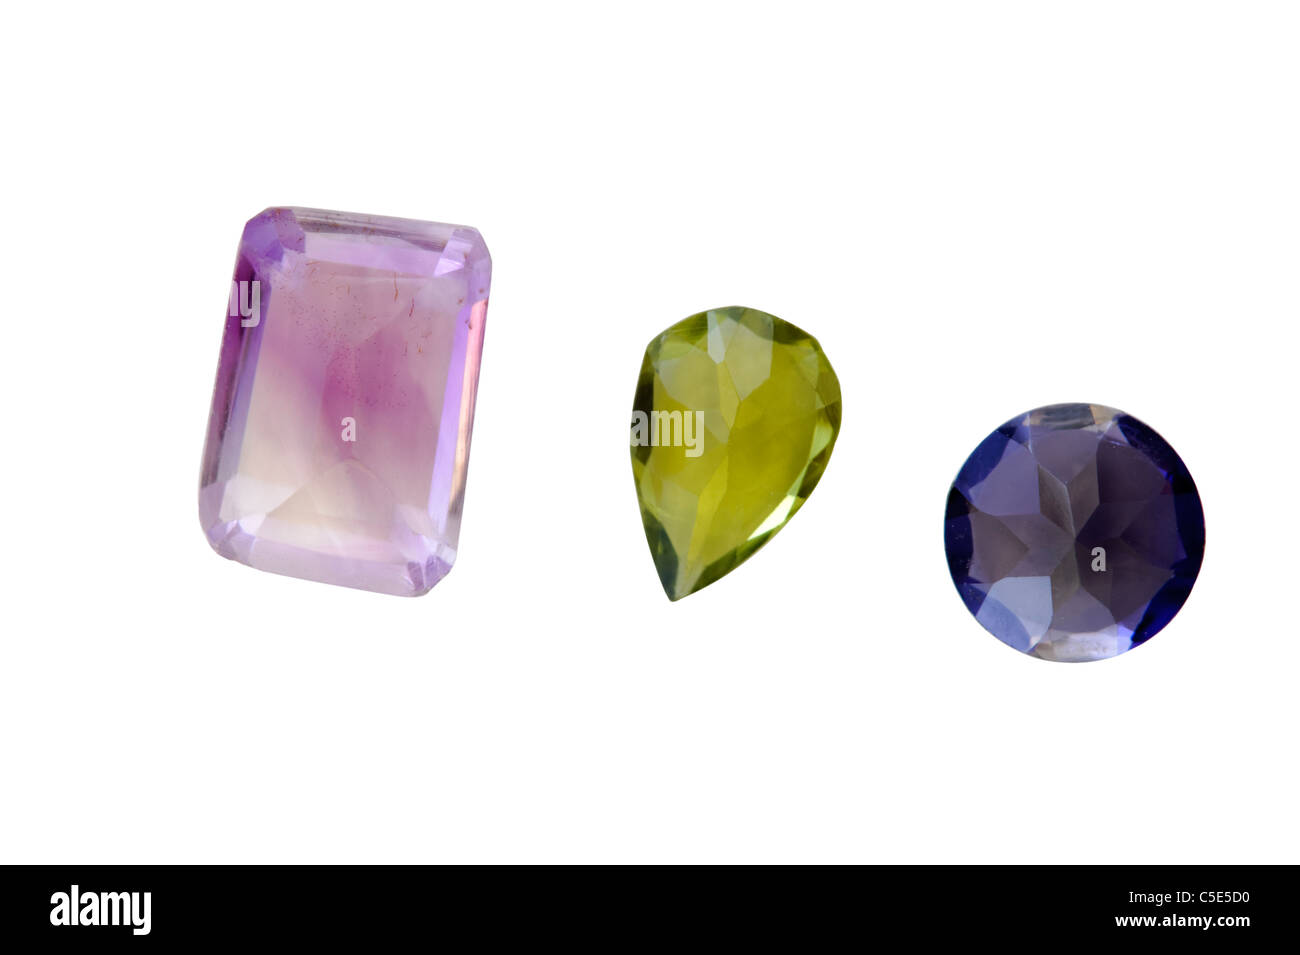 Three semi-precious gemstones Amethyst from Brazil, Green Peridot from Ethiopia and Blue Iolite from India Stock Photo